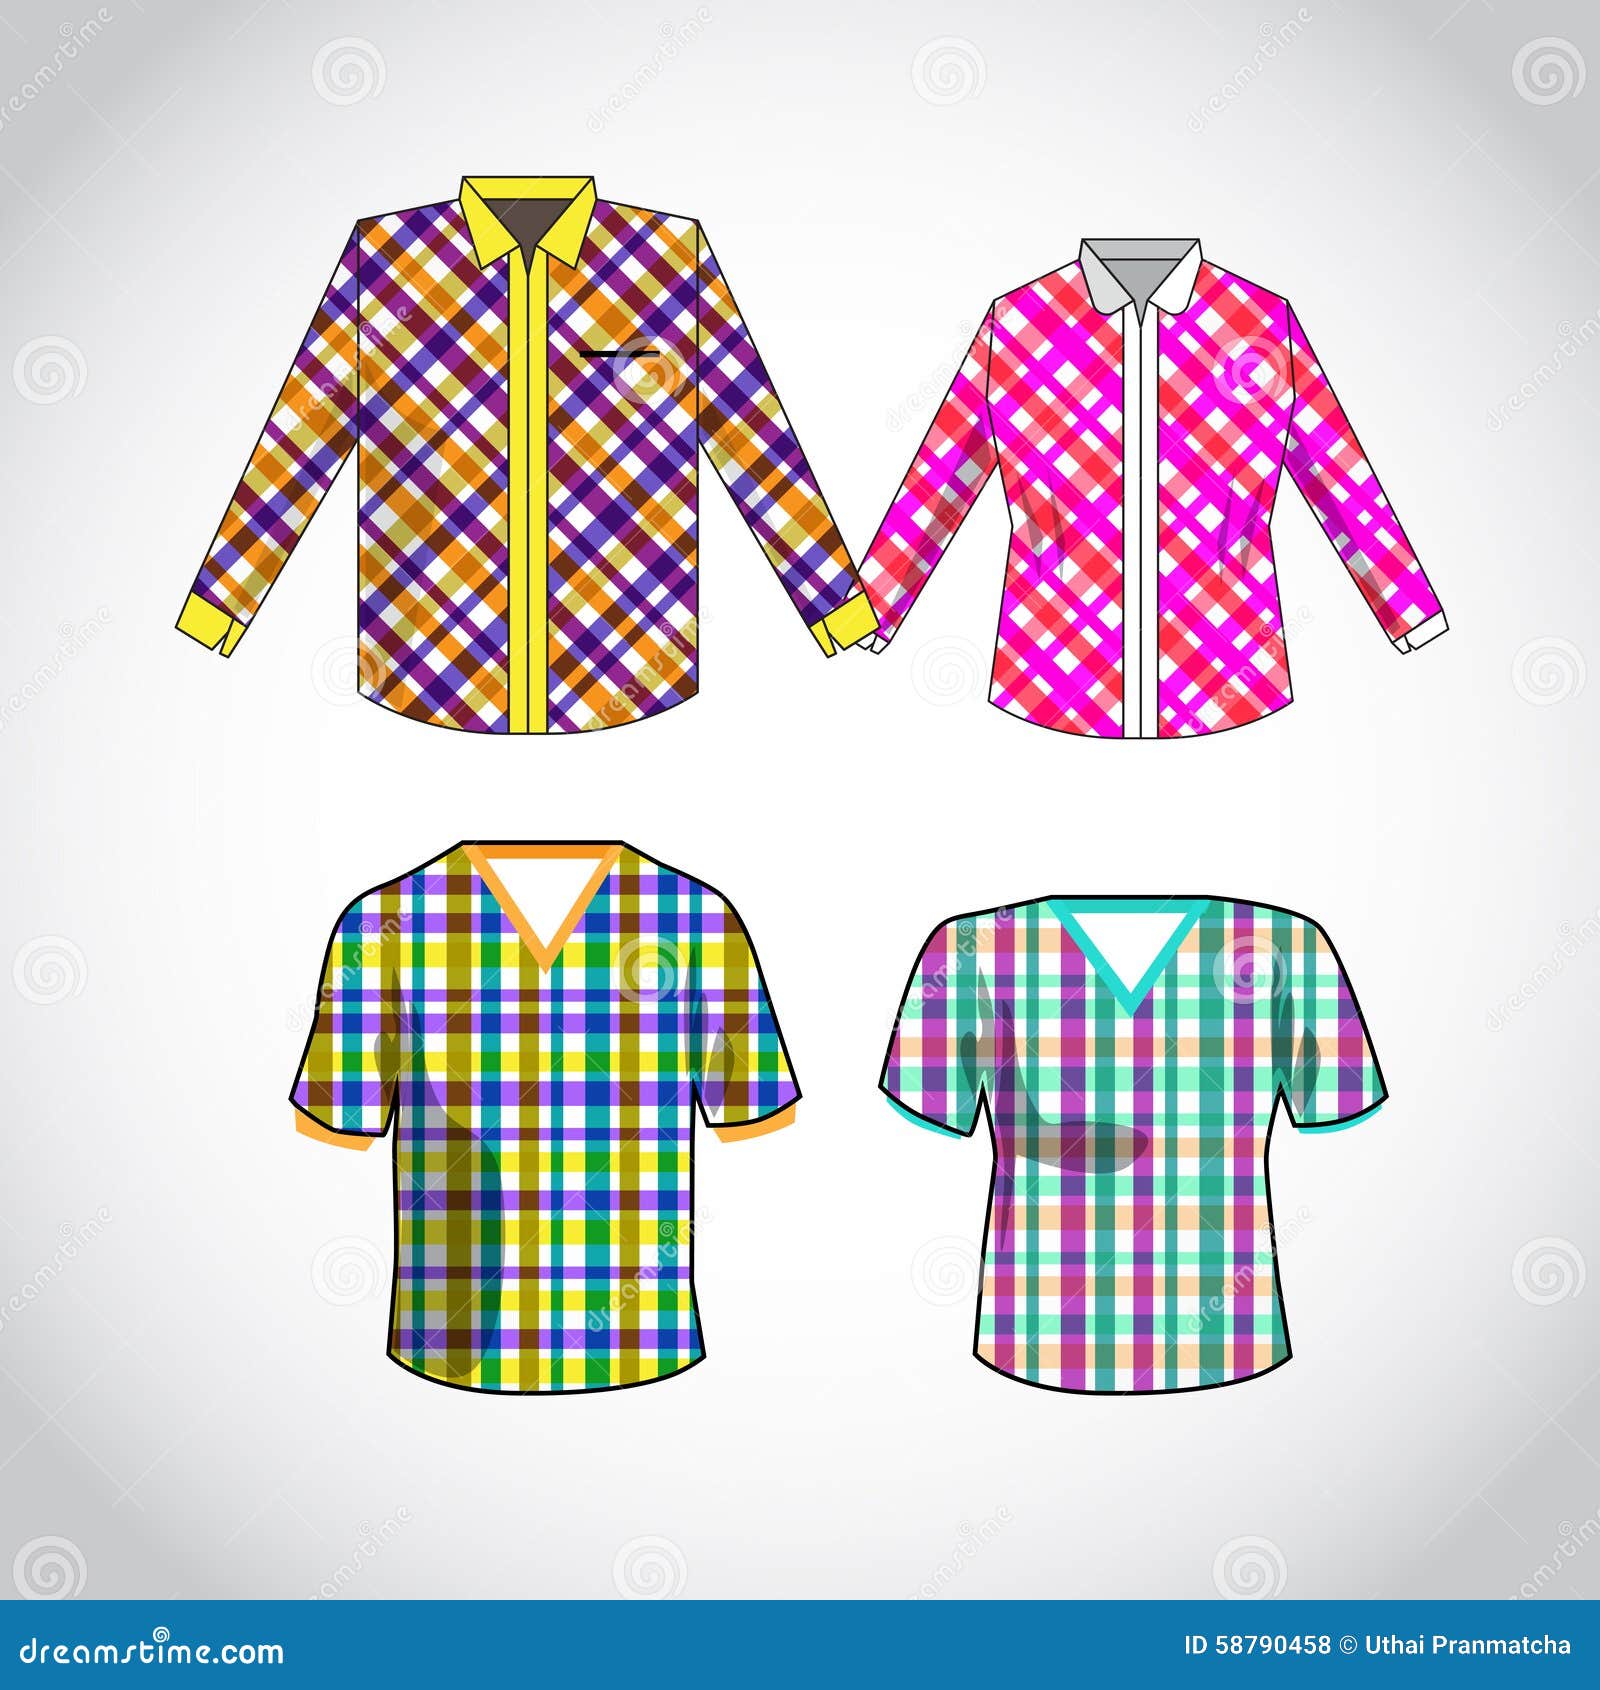 Download Vector Shirt With Pattern Design Stock Vector ...